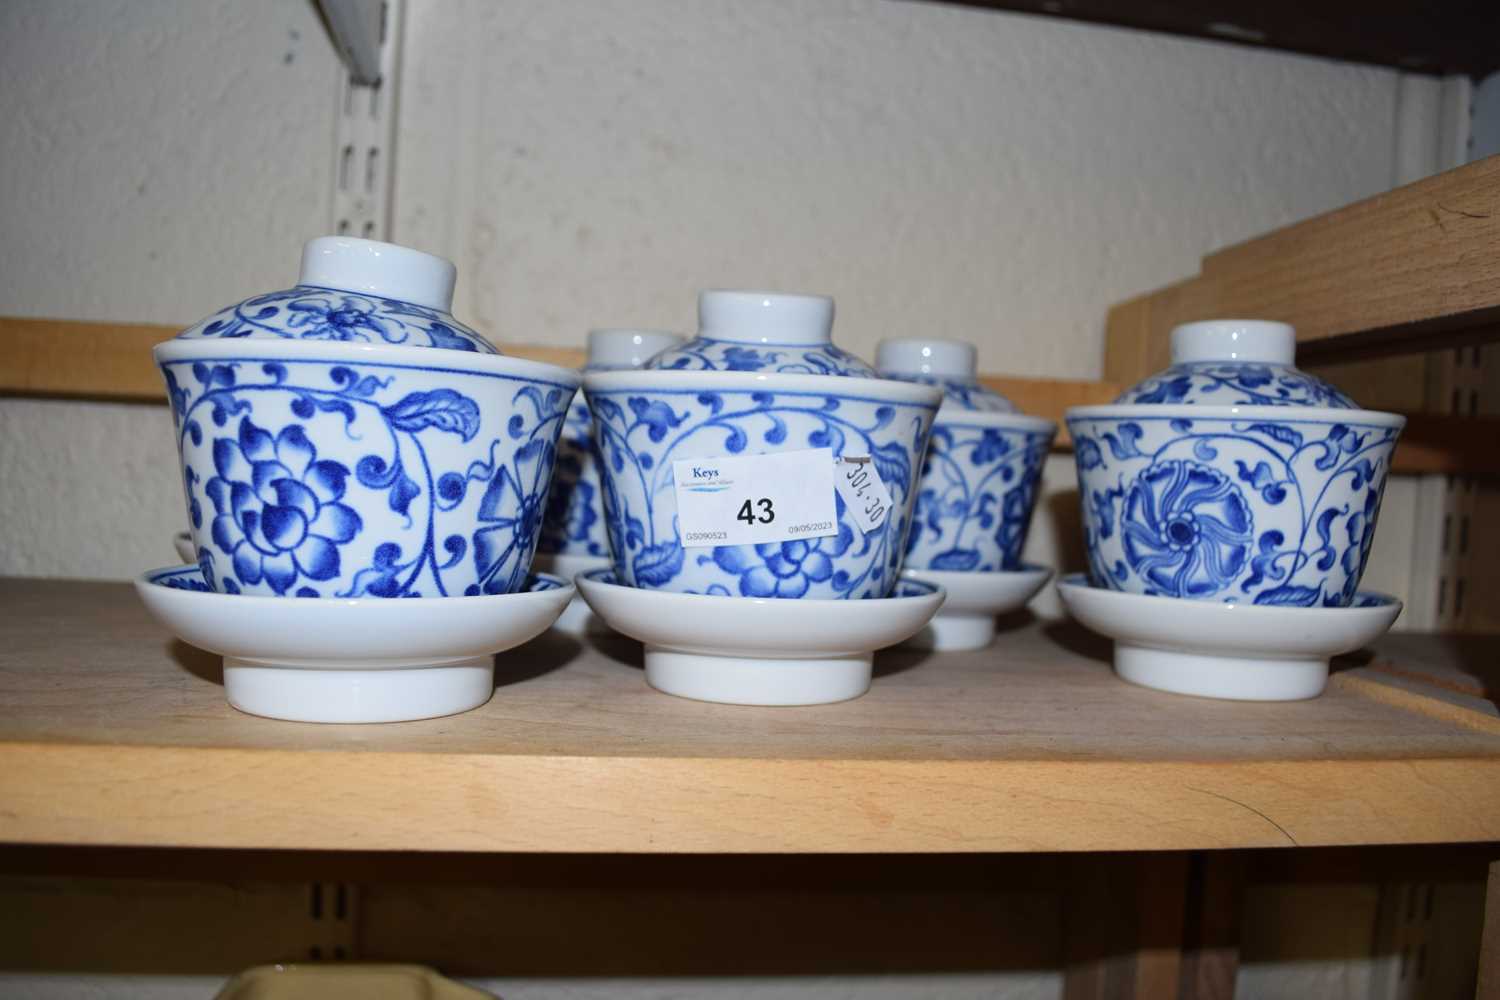 Six modern blue and white tea bowls, saucers and covers